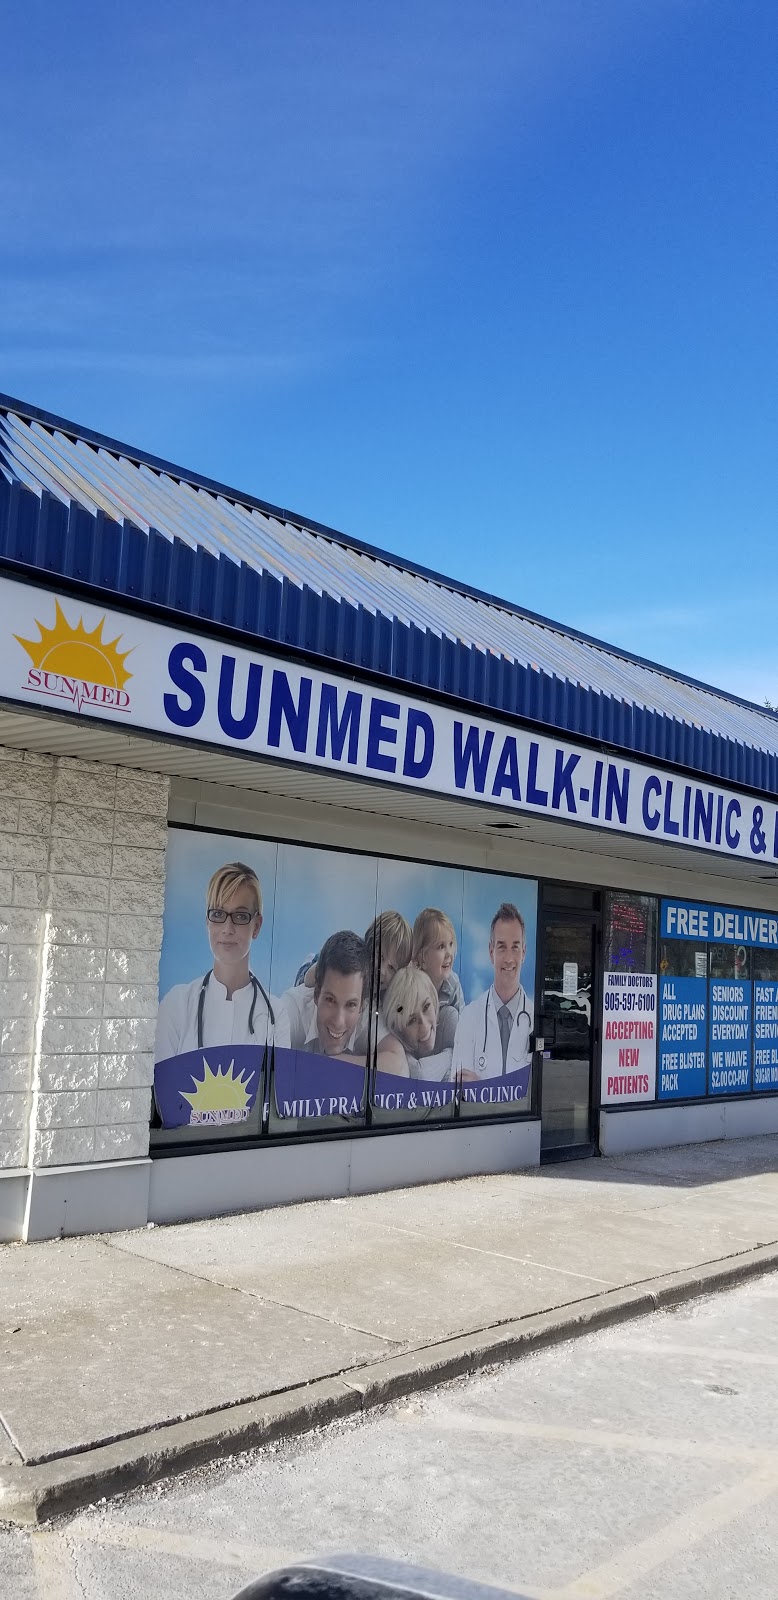 Sunmed Family Practice and Walk-In Clinic | health | 300 Steeles Ave W #10, Thornhill, ON L4J 1A1, Canada | 9055976100 OR +1 905-597-6100